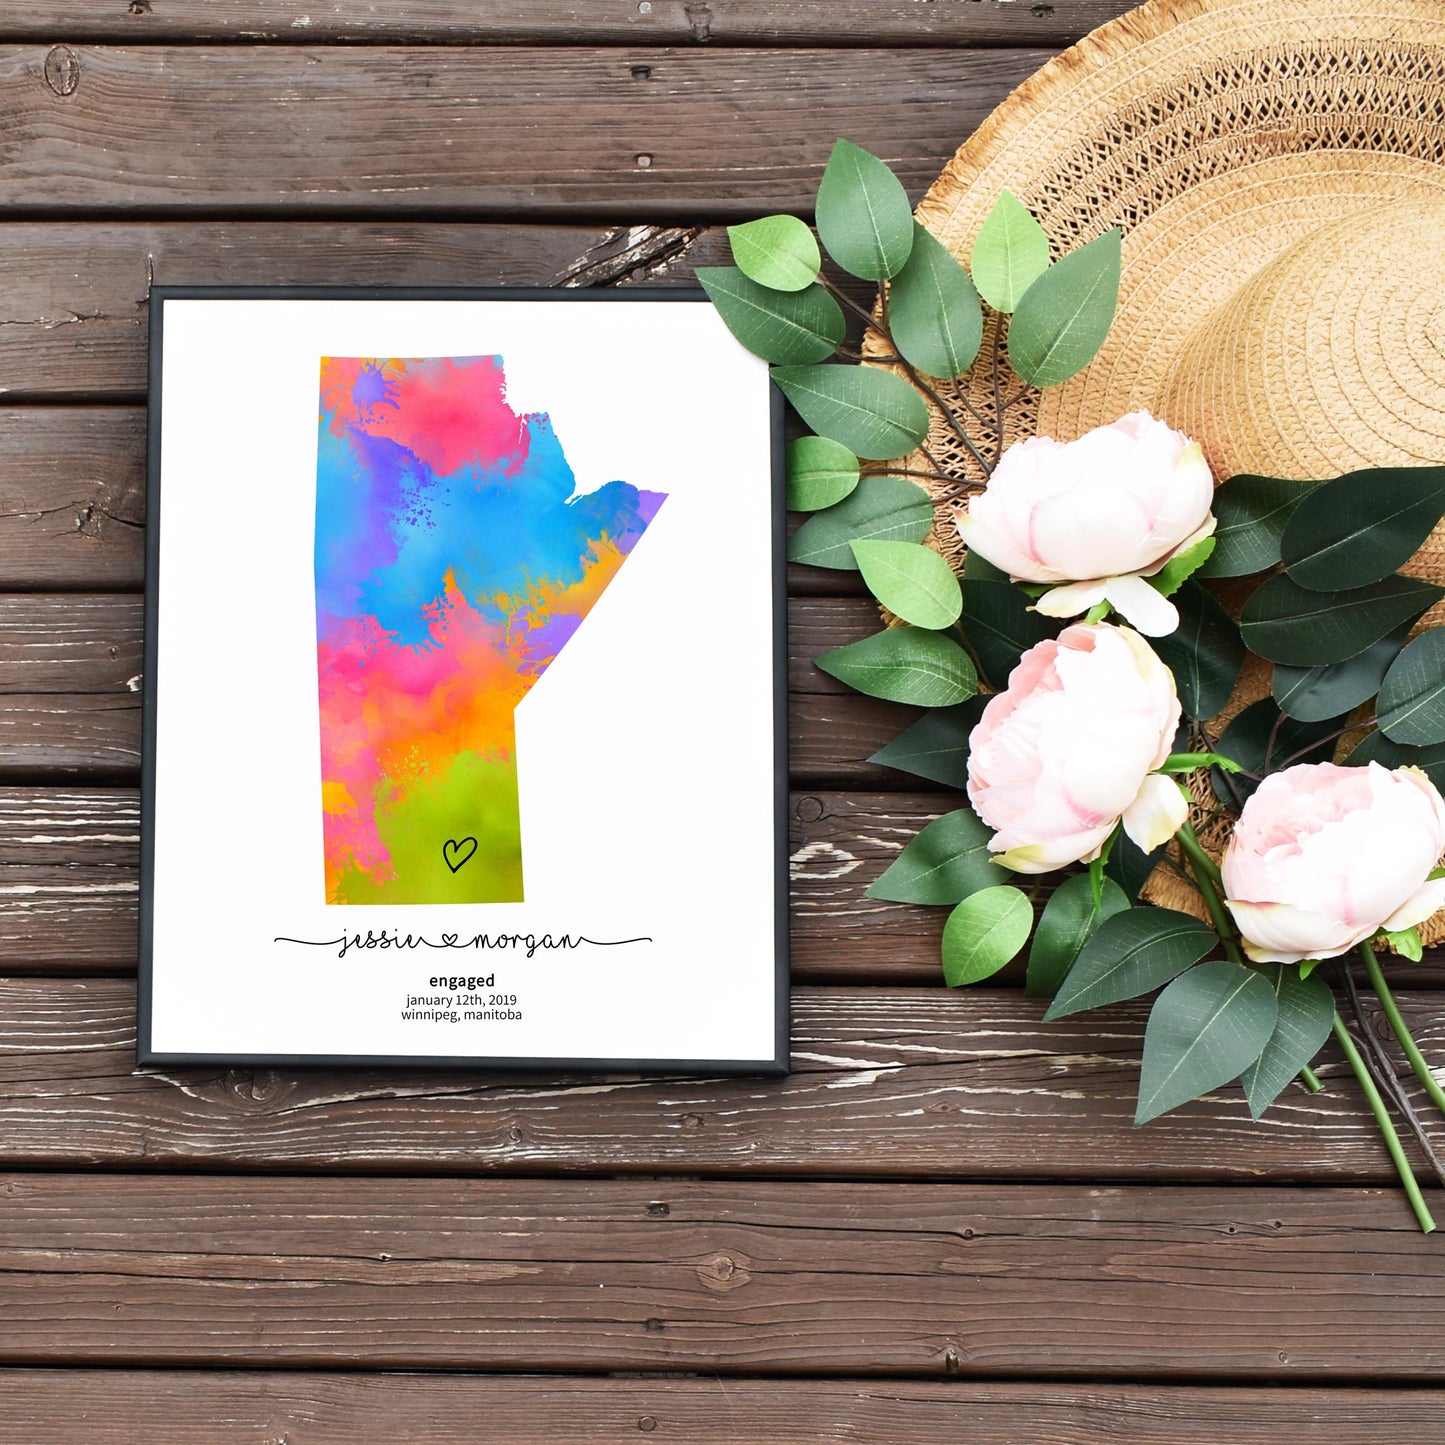 DIY Edit Yourself Manitoba Engagement Map Last Minute Wedding Gift on a Budget